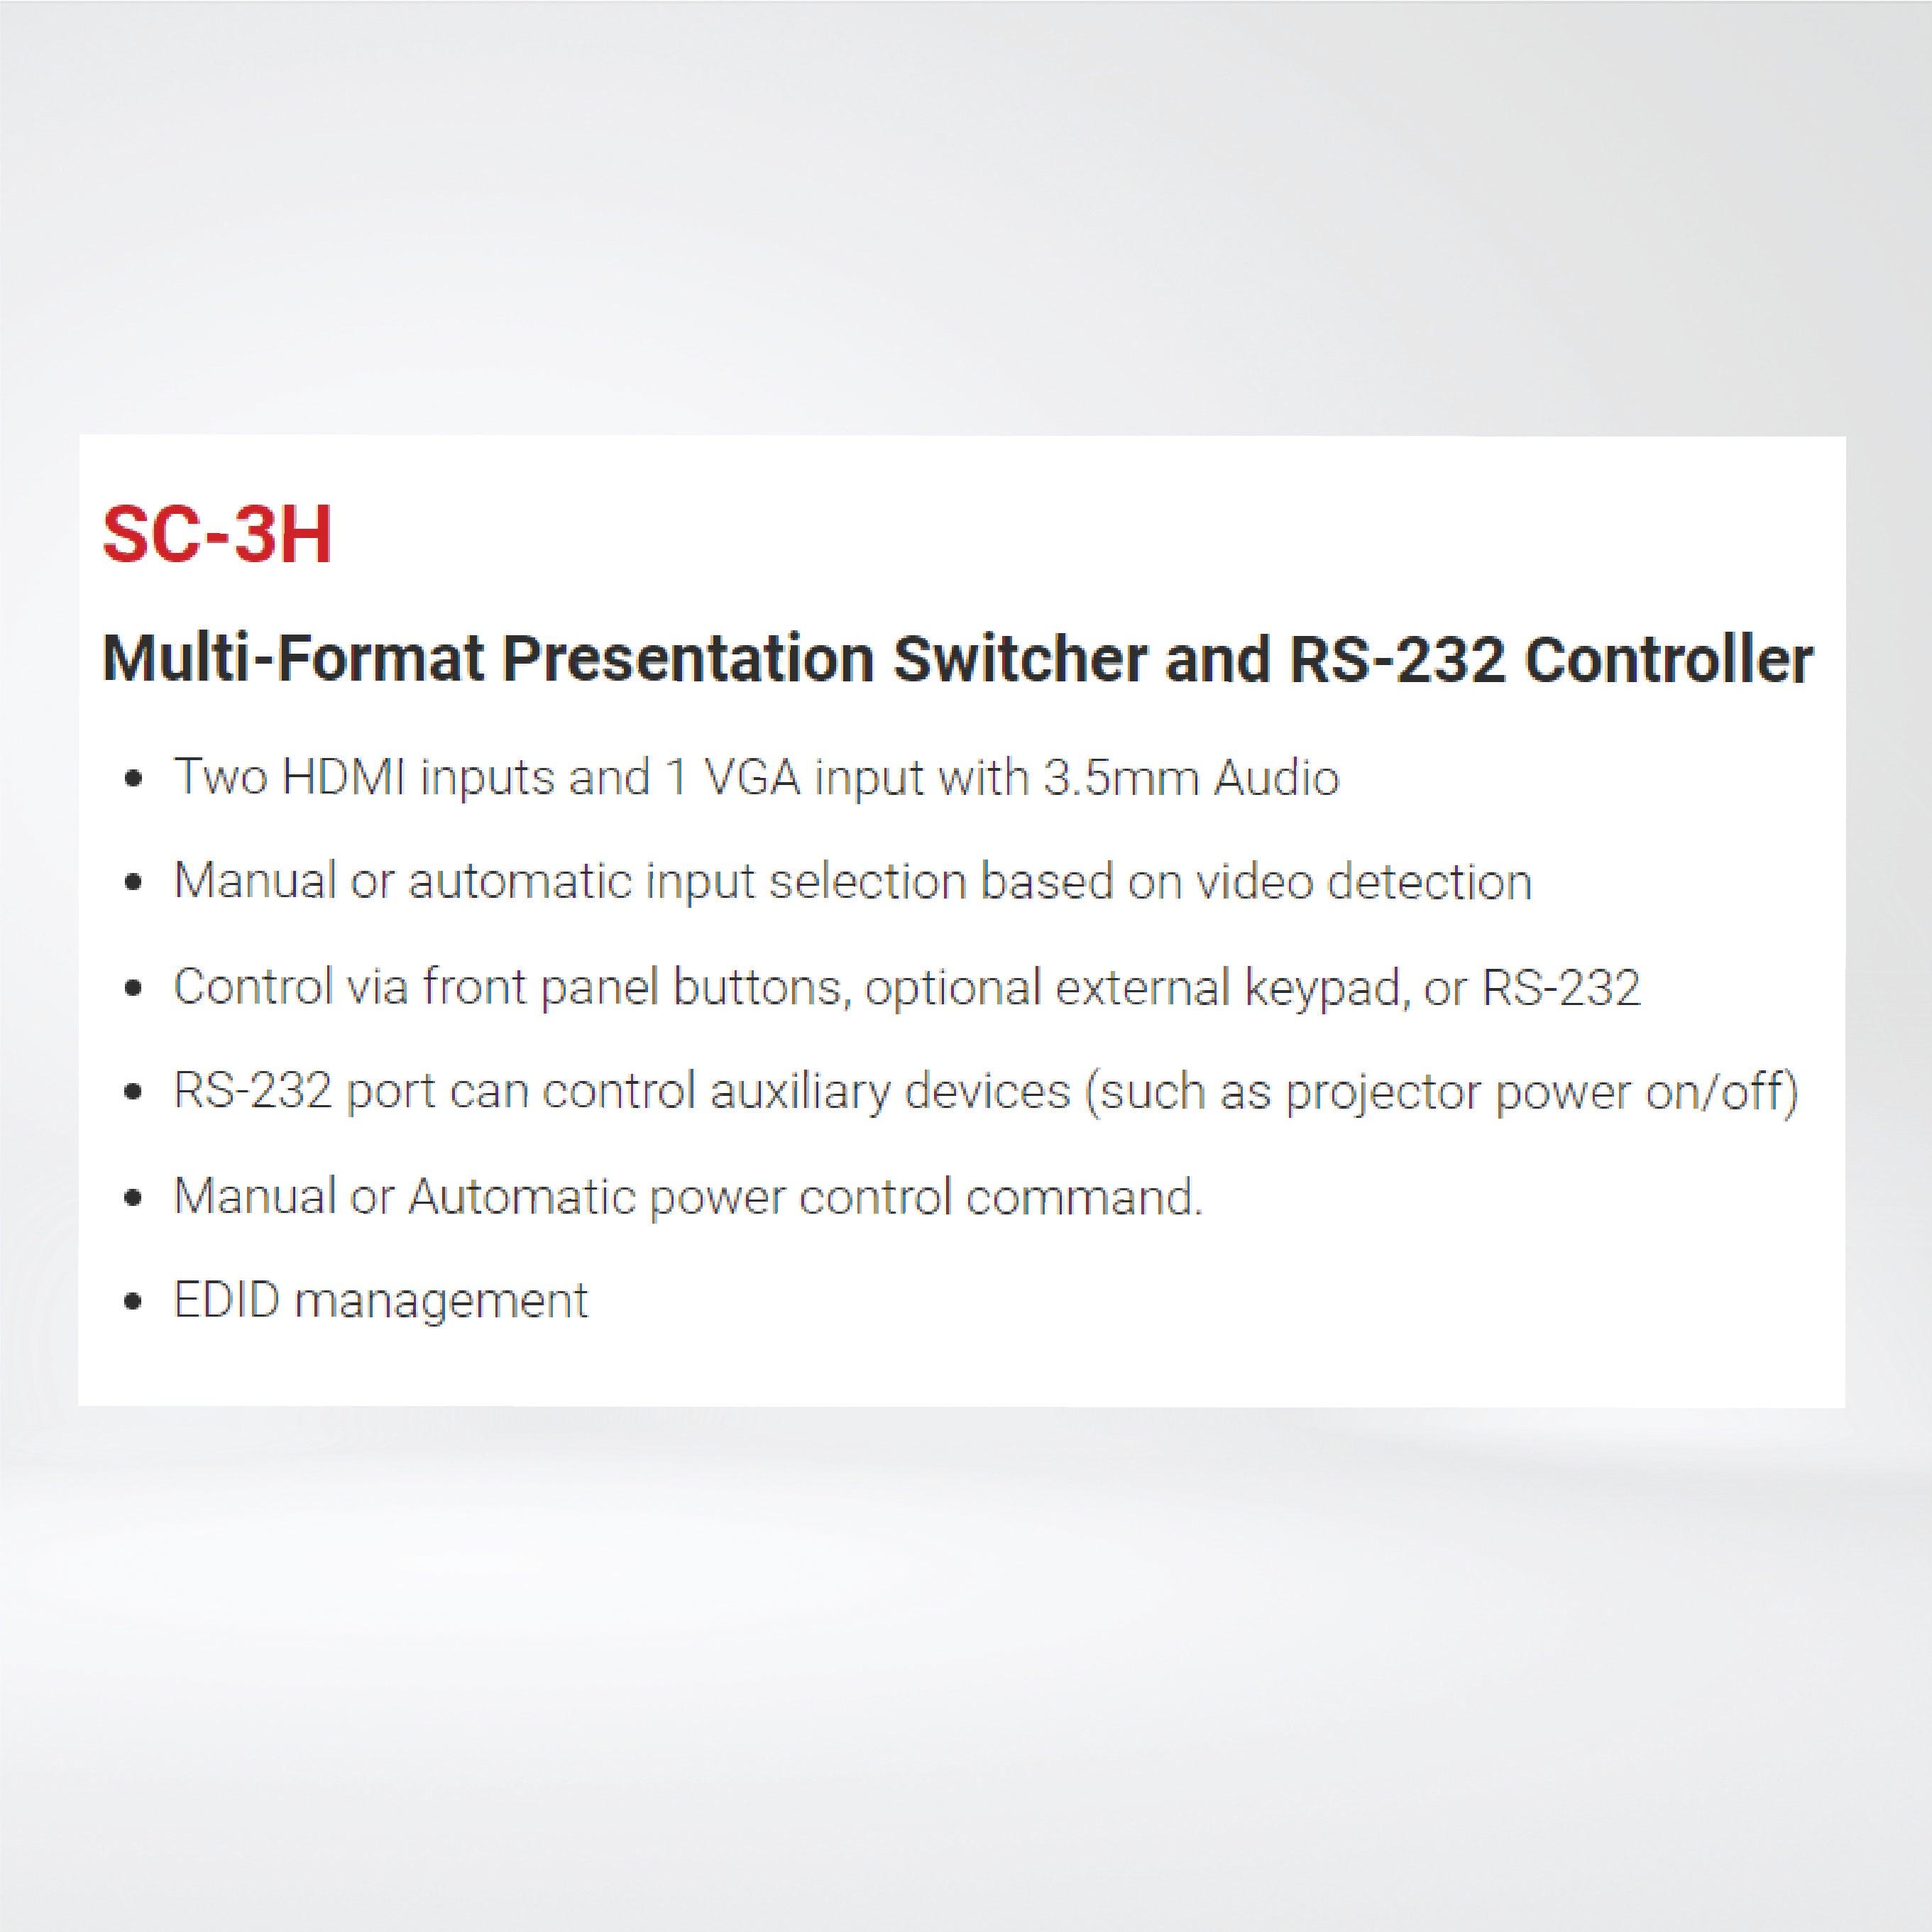 SC-3H Multi-Format Presentation Switcher and RS-232 Controller - Riverplus